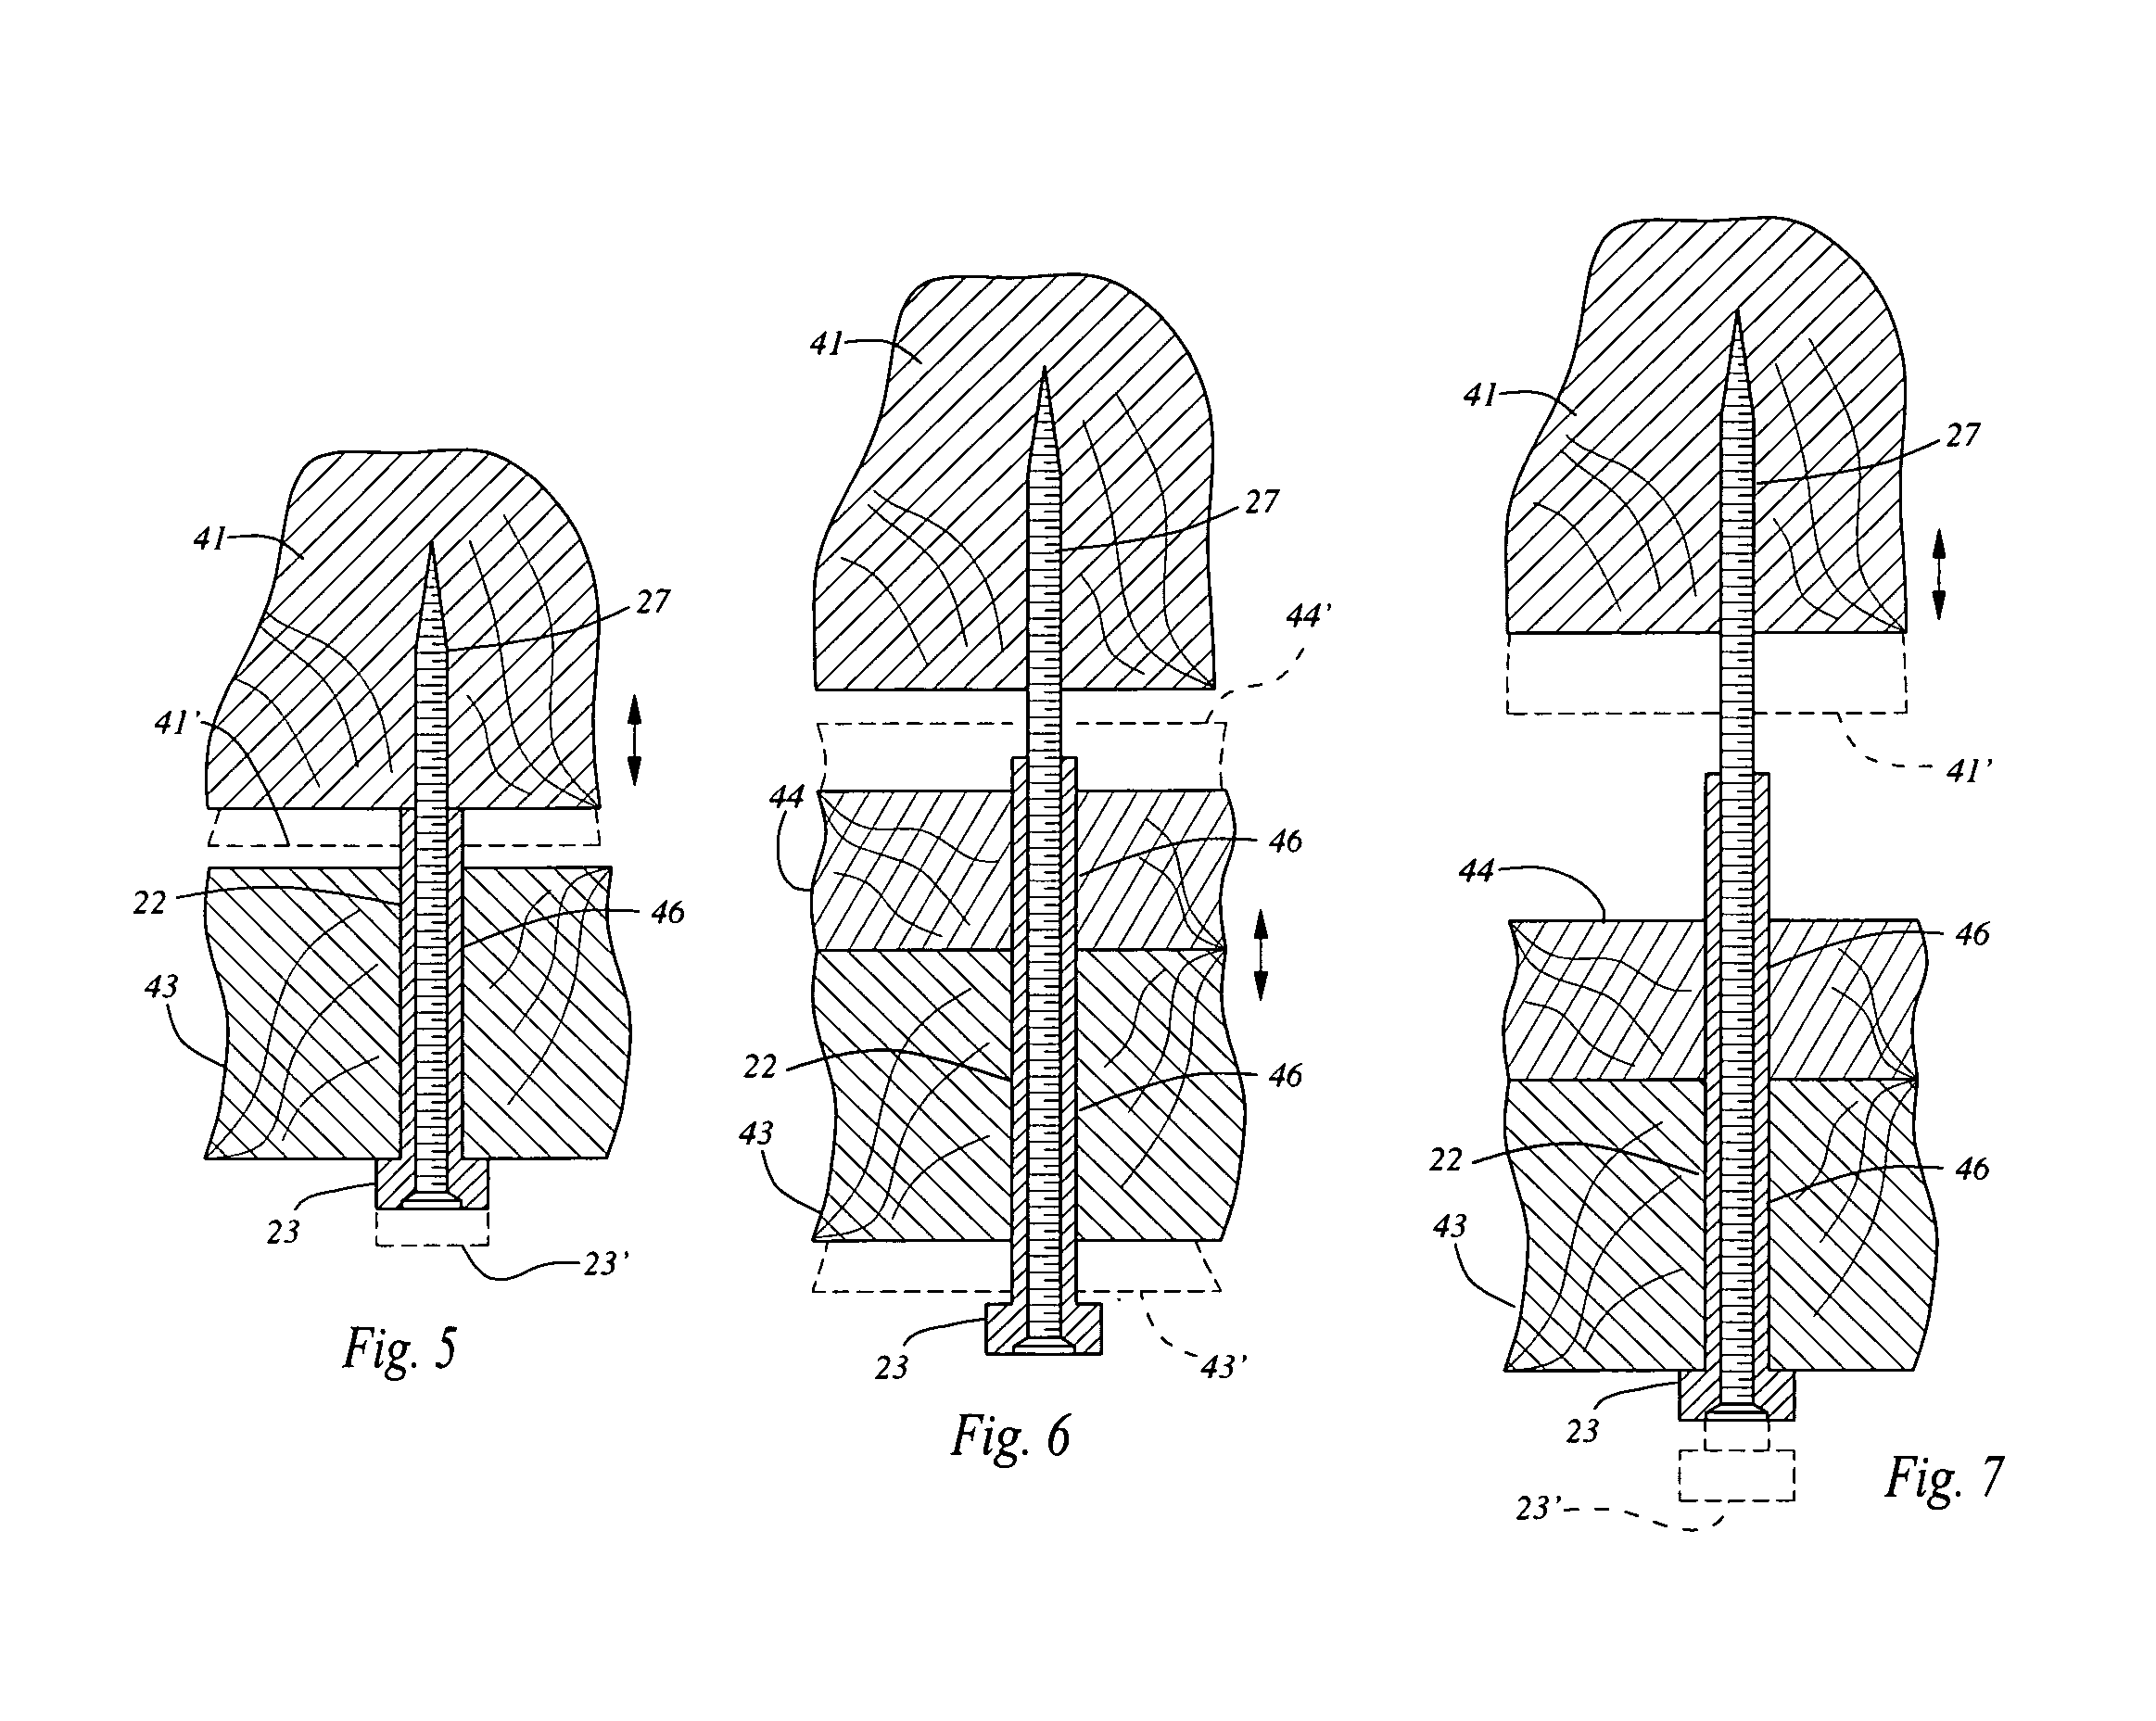 Method and apparatus for securing non-load bearing walls